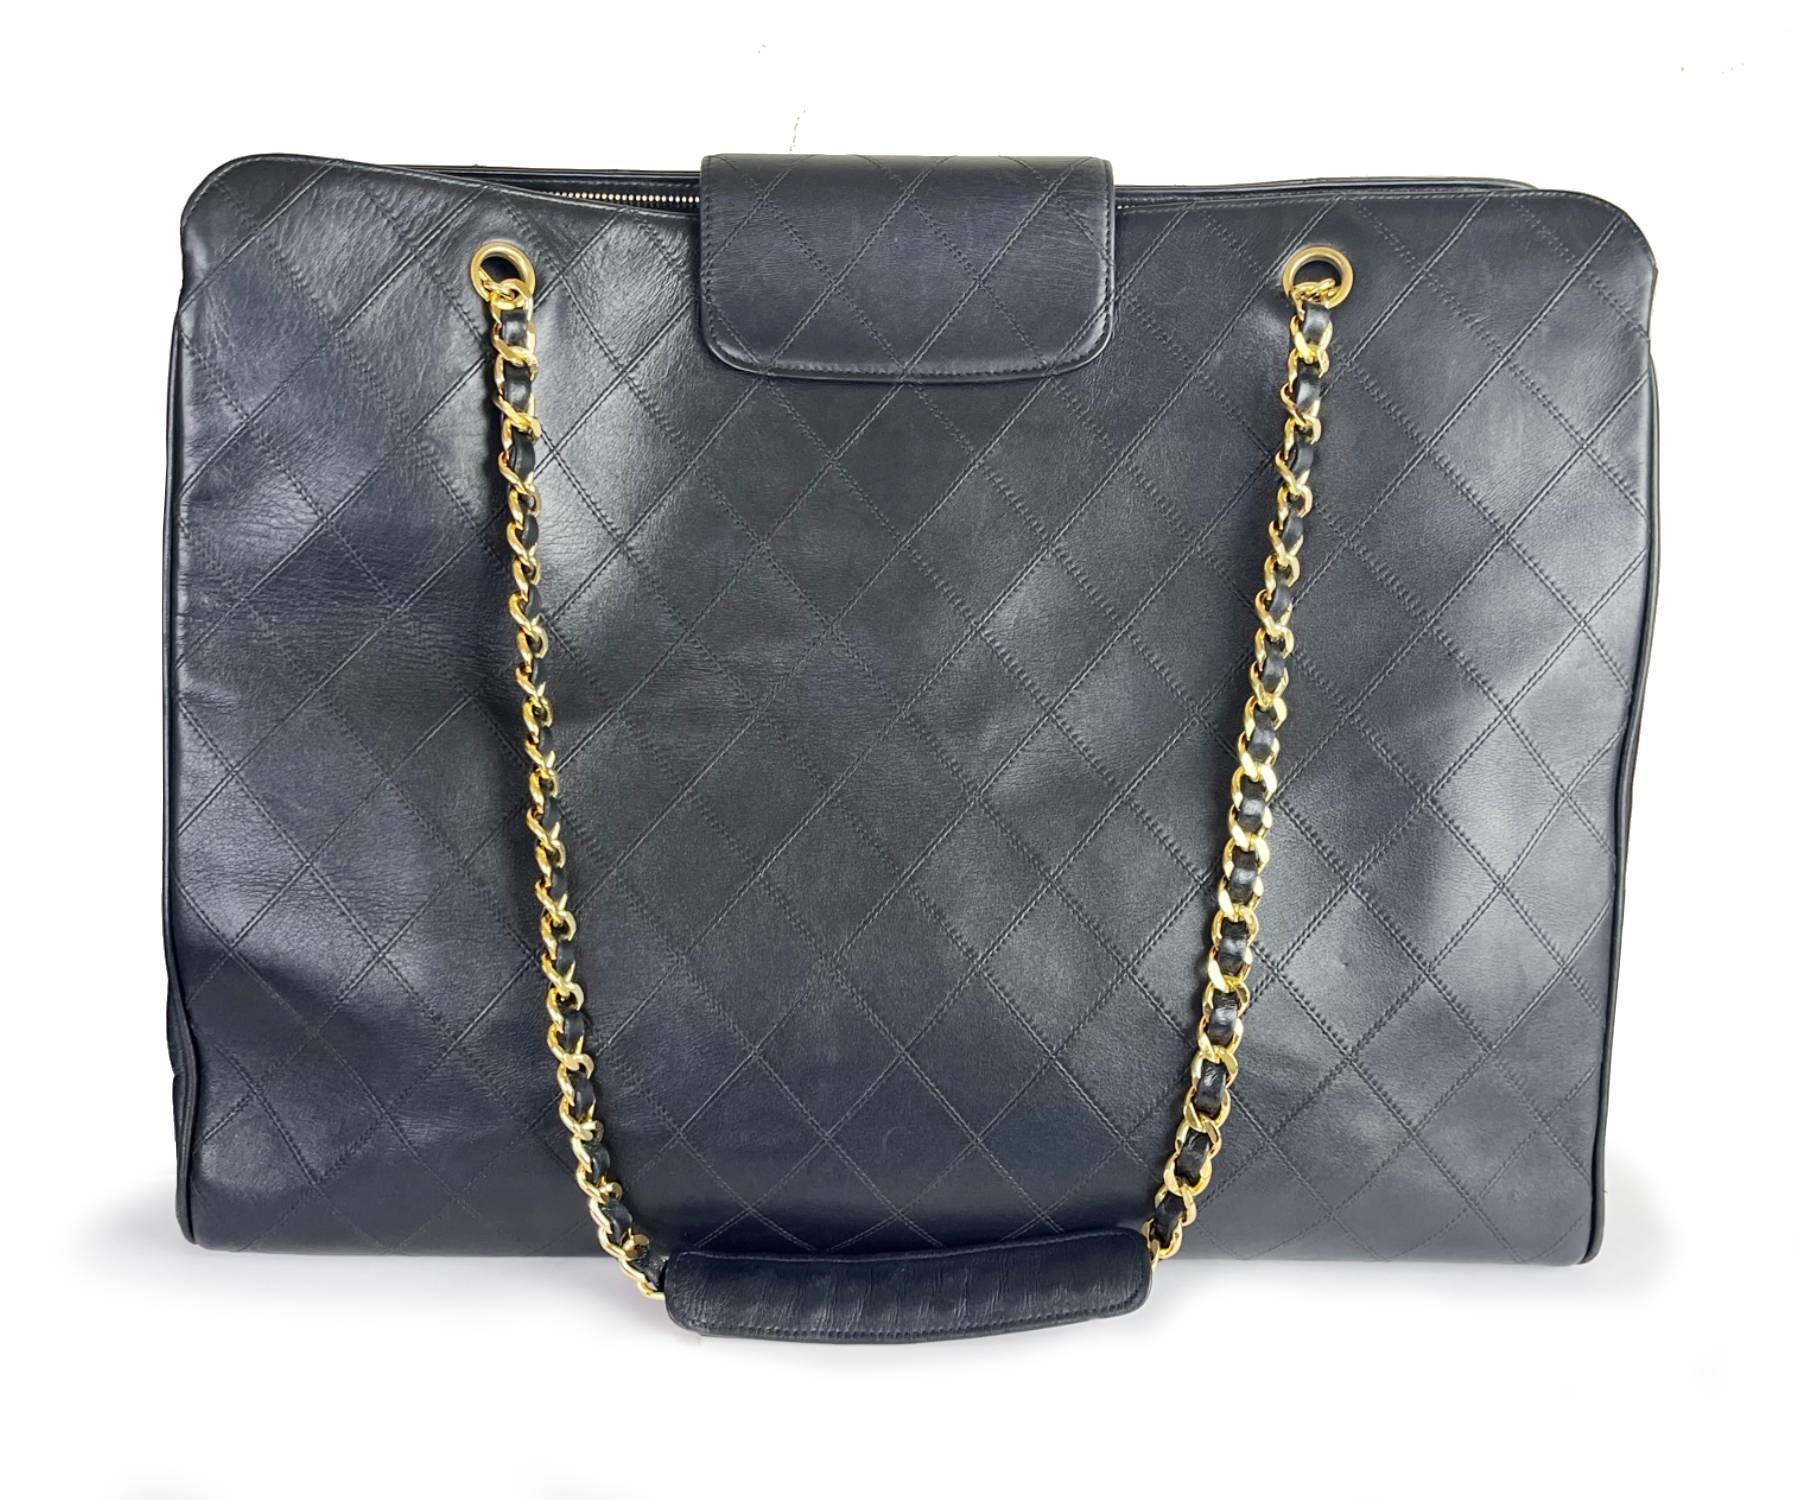 Chanel Vintage Super Model Jumbo 18″ Quilted CC Turnlock Bag As seen on Ashlee Simpson

* 255XXXX
* Made in Italy
* As seen on Ashlee Simpson and Lauren Conrad
* Comes with the control number card

-It is approximately 18.1″ x 14″ x 7.1 ” .
-Corners